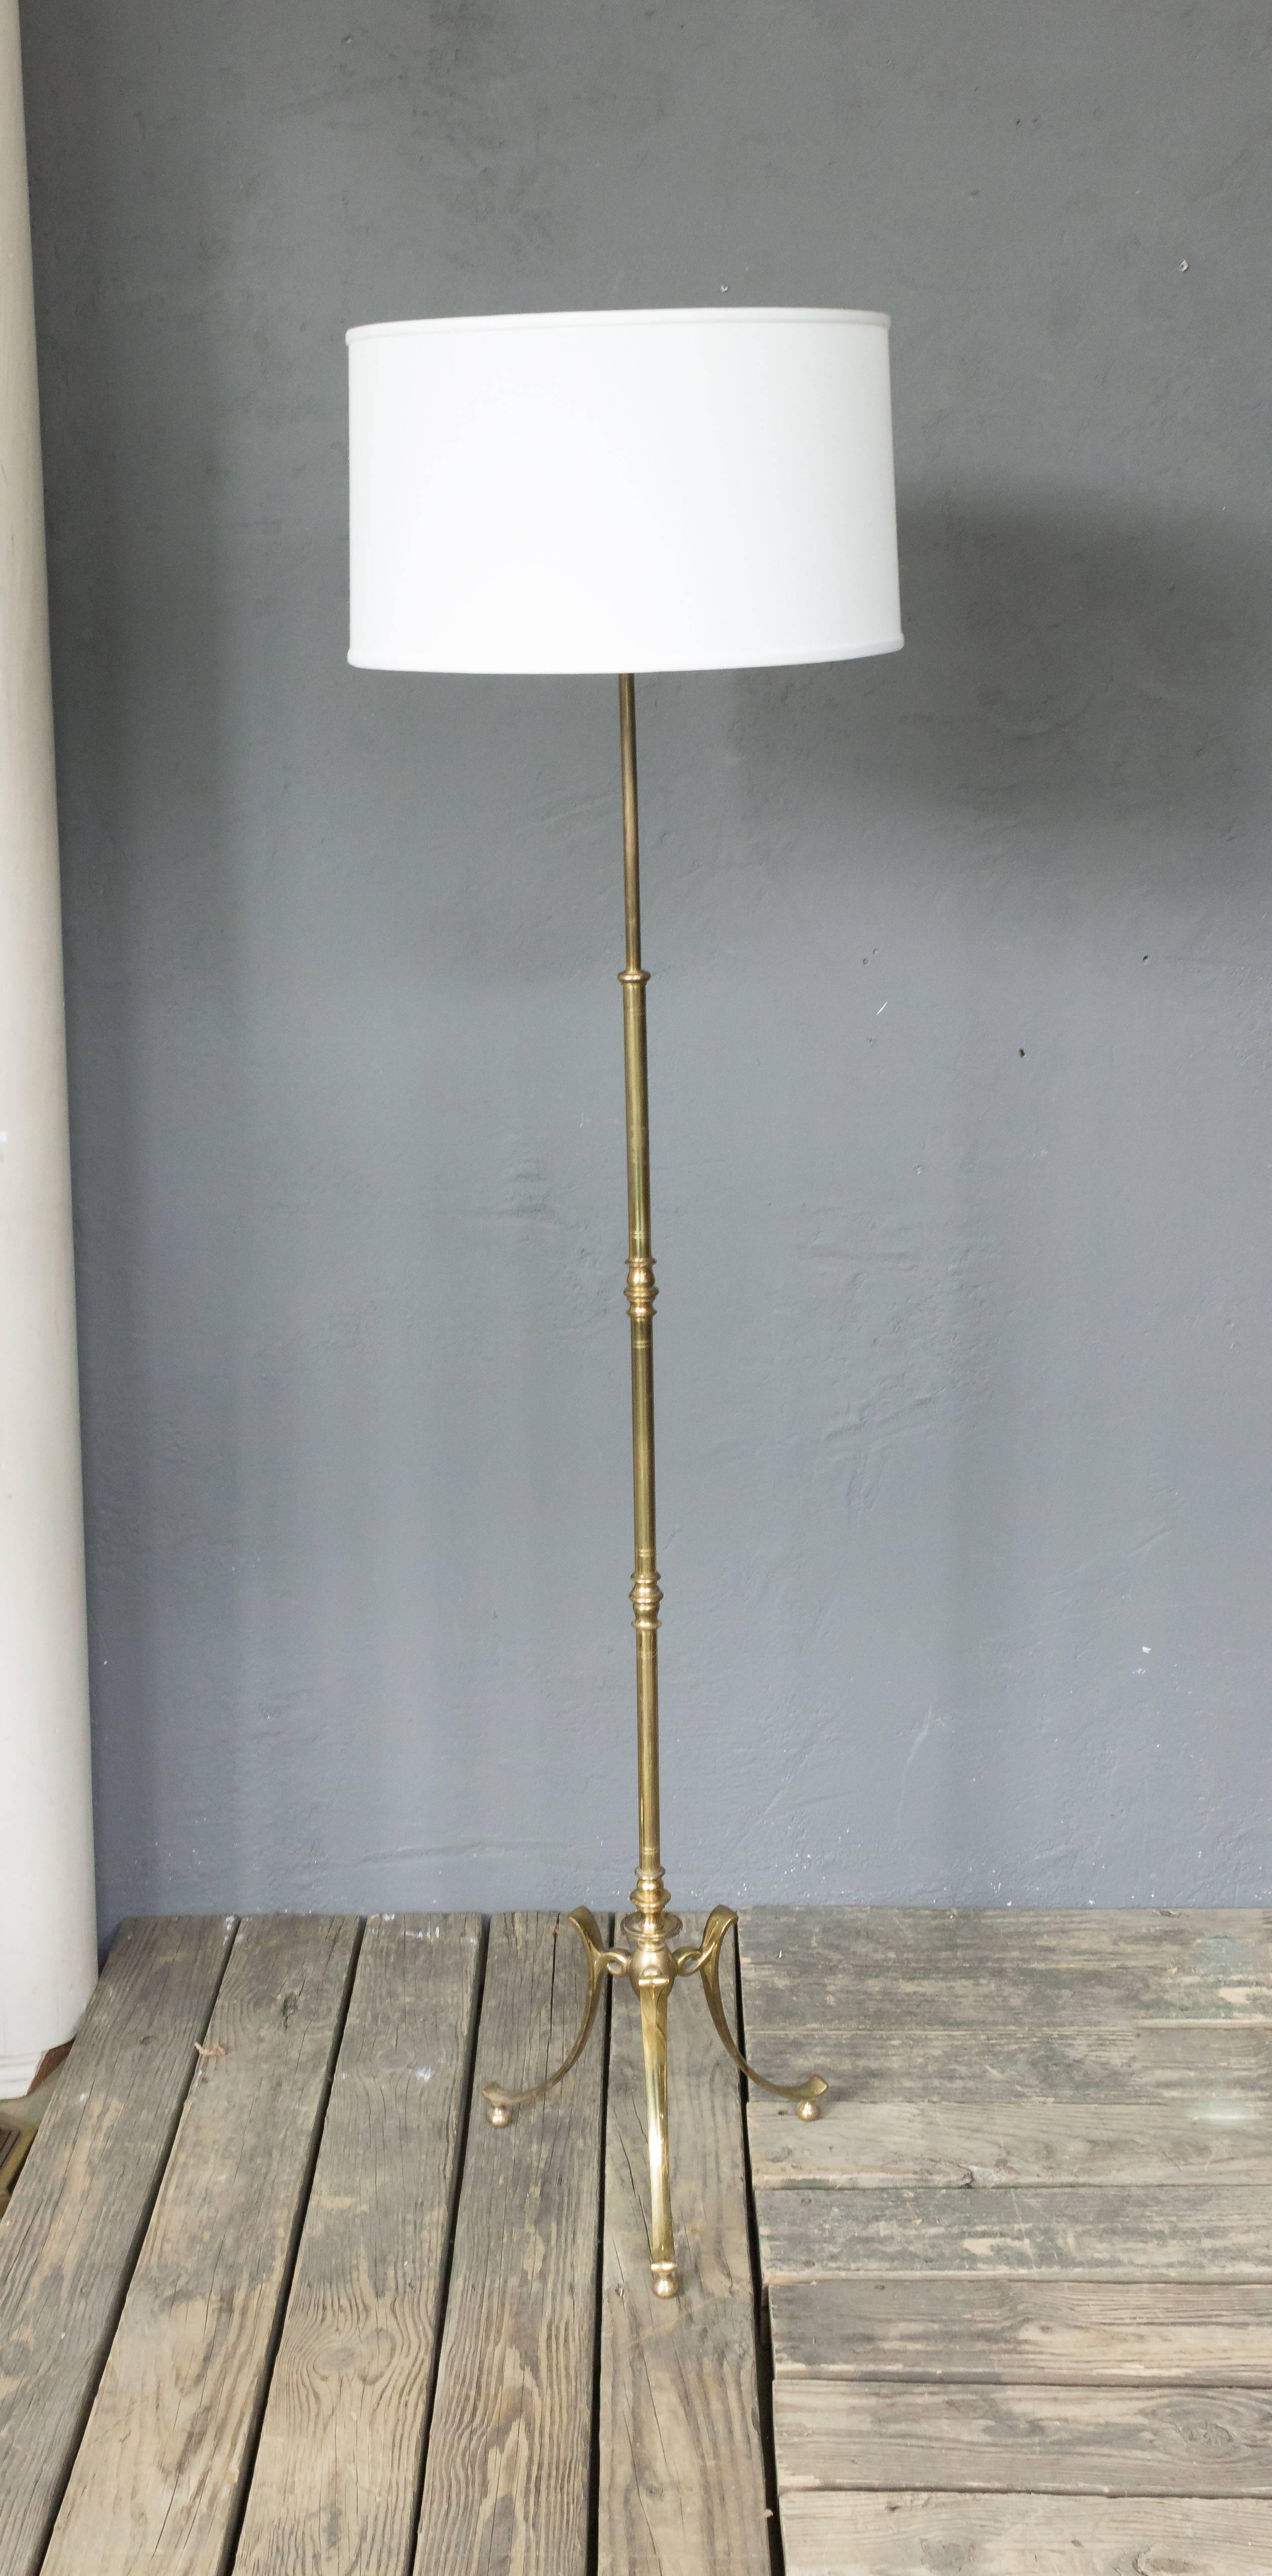 French 1950s brass floor lamp with tripod base. Recently rewired.

Not sold with shade.